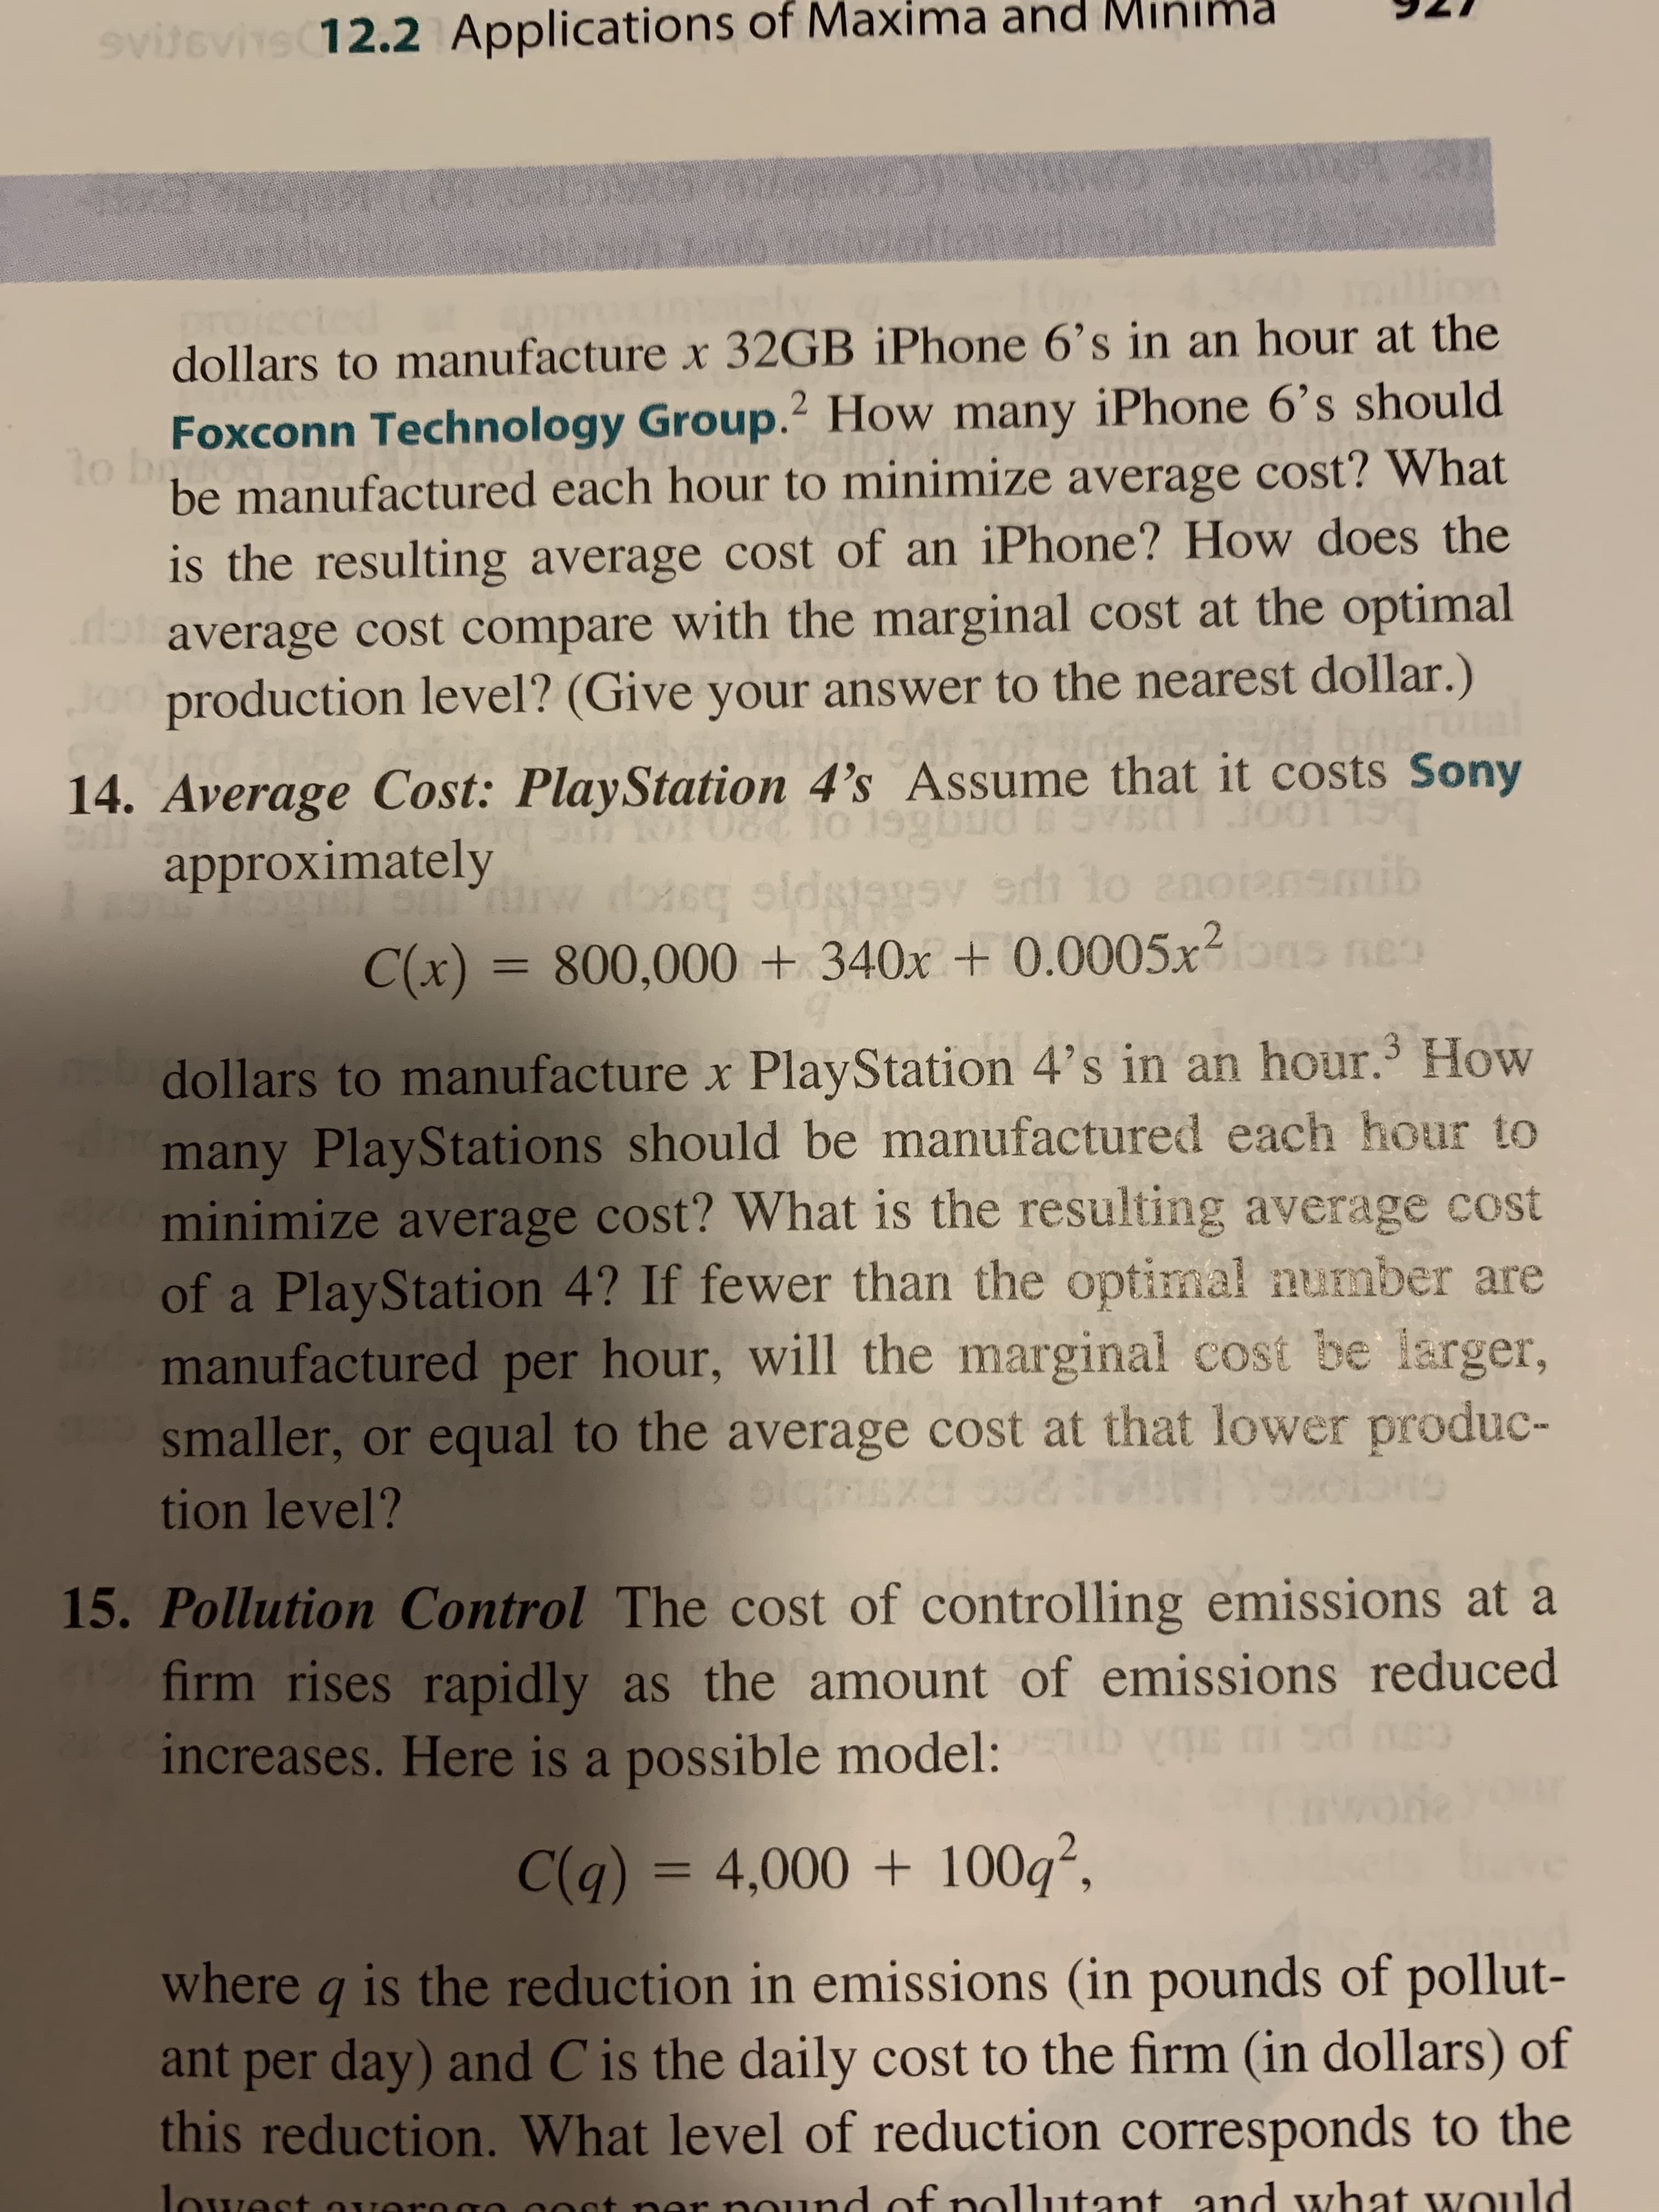 14. Average Cost: PlayStation 4's Assume that it costs Sony
approximately
113001
nsmib
O86 10 199bud
rw doeq oldst9gsy edi lo an
C(x) = 800,000 + 340x + 0.0005x2ons nes
%3D
dollars to manufacture x PlayStation 4's in an hour. How
many PlayStations should be manufactured each hour to
minimize average cost? What is the resulting average cost
of a PlayStation 4? If fewer than the optimal number are
manufactured per hour, will the marginal cost be larger,
smaller, or equal to the average cost at that lower produc-
tion level?
